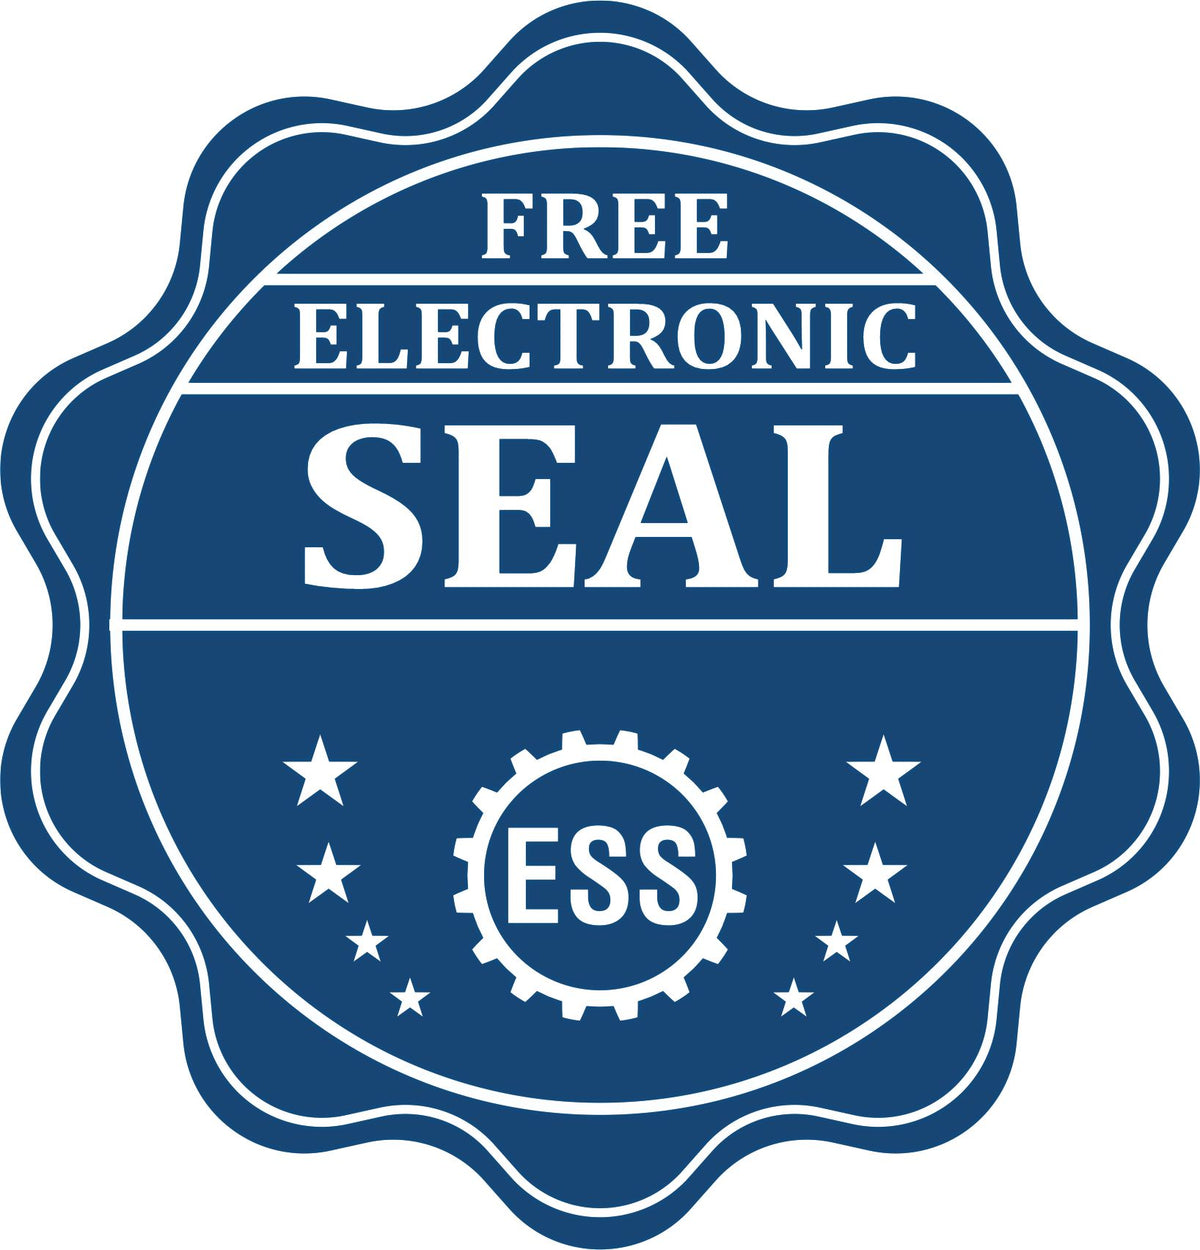 A badge showing a free electronic seal for the Slim Pre-Inked Maryland Professional Geologist Seal Stamp with stars and the ESS gear on the emblem.